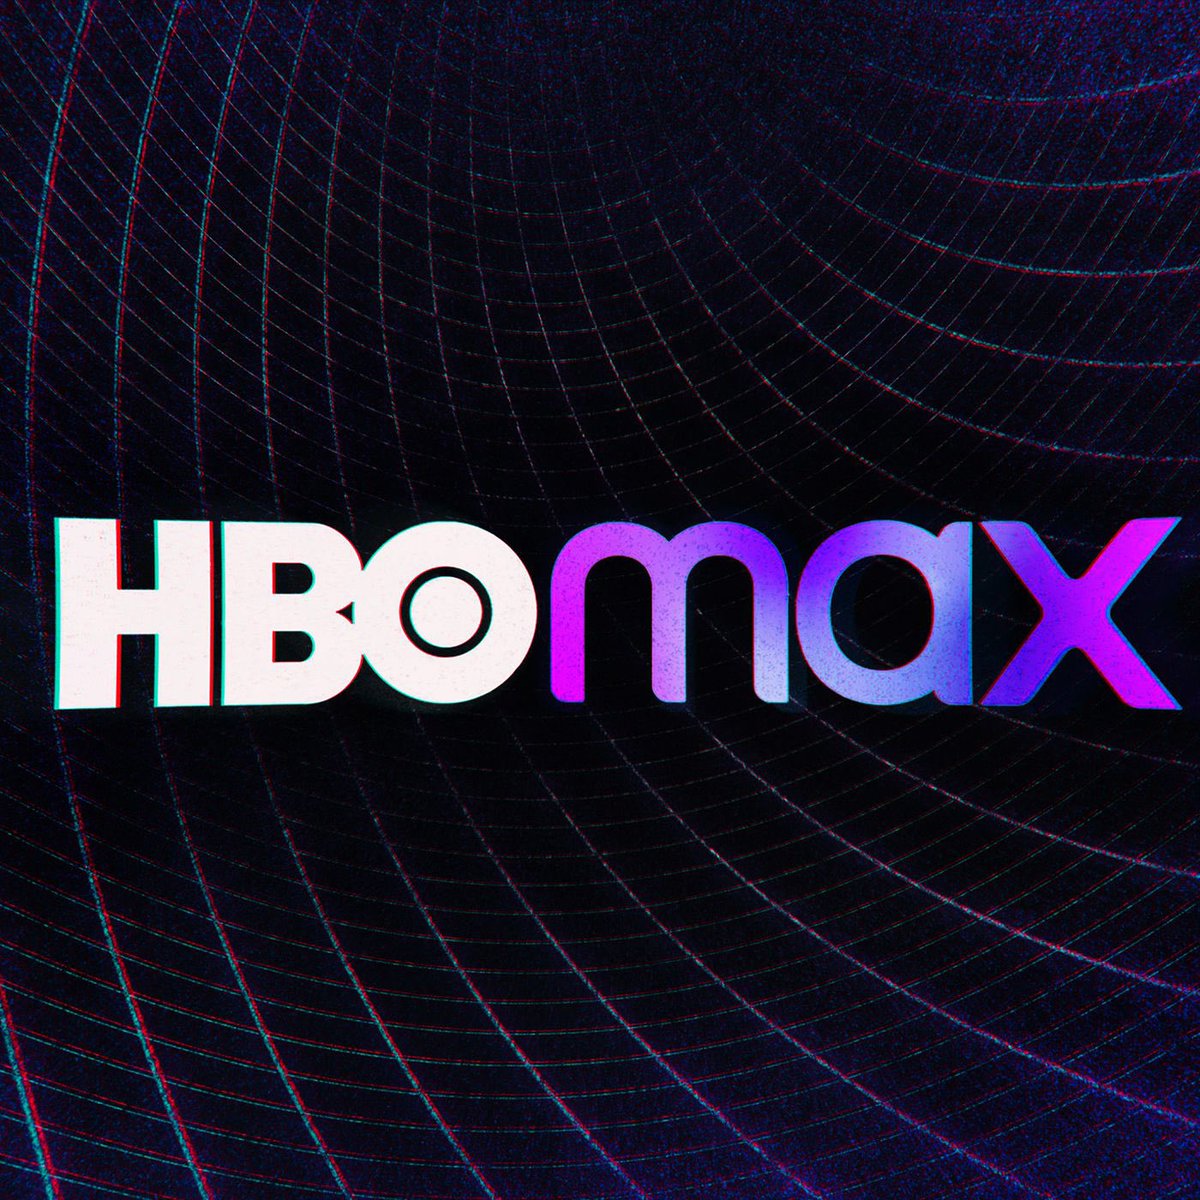 HBO Max/Discovery+ combined service to launch in summer 2023